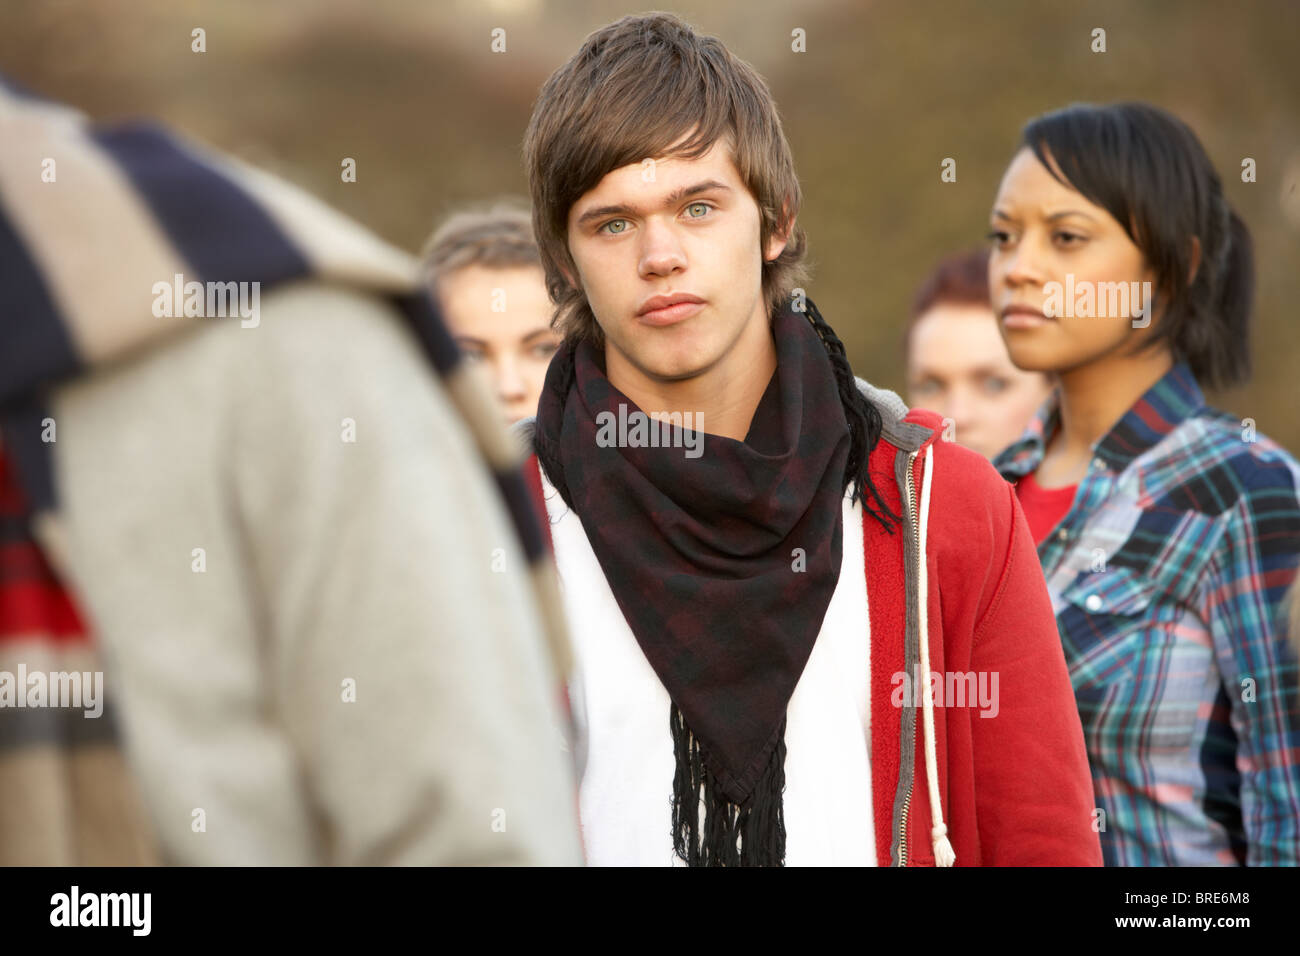 Teenage Boy Surrounded By Friends In Outdoor Autumn Landscape Stock Photo